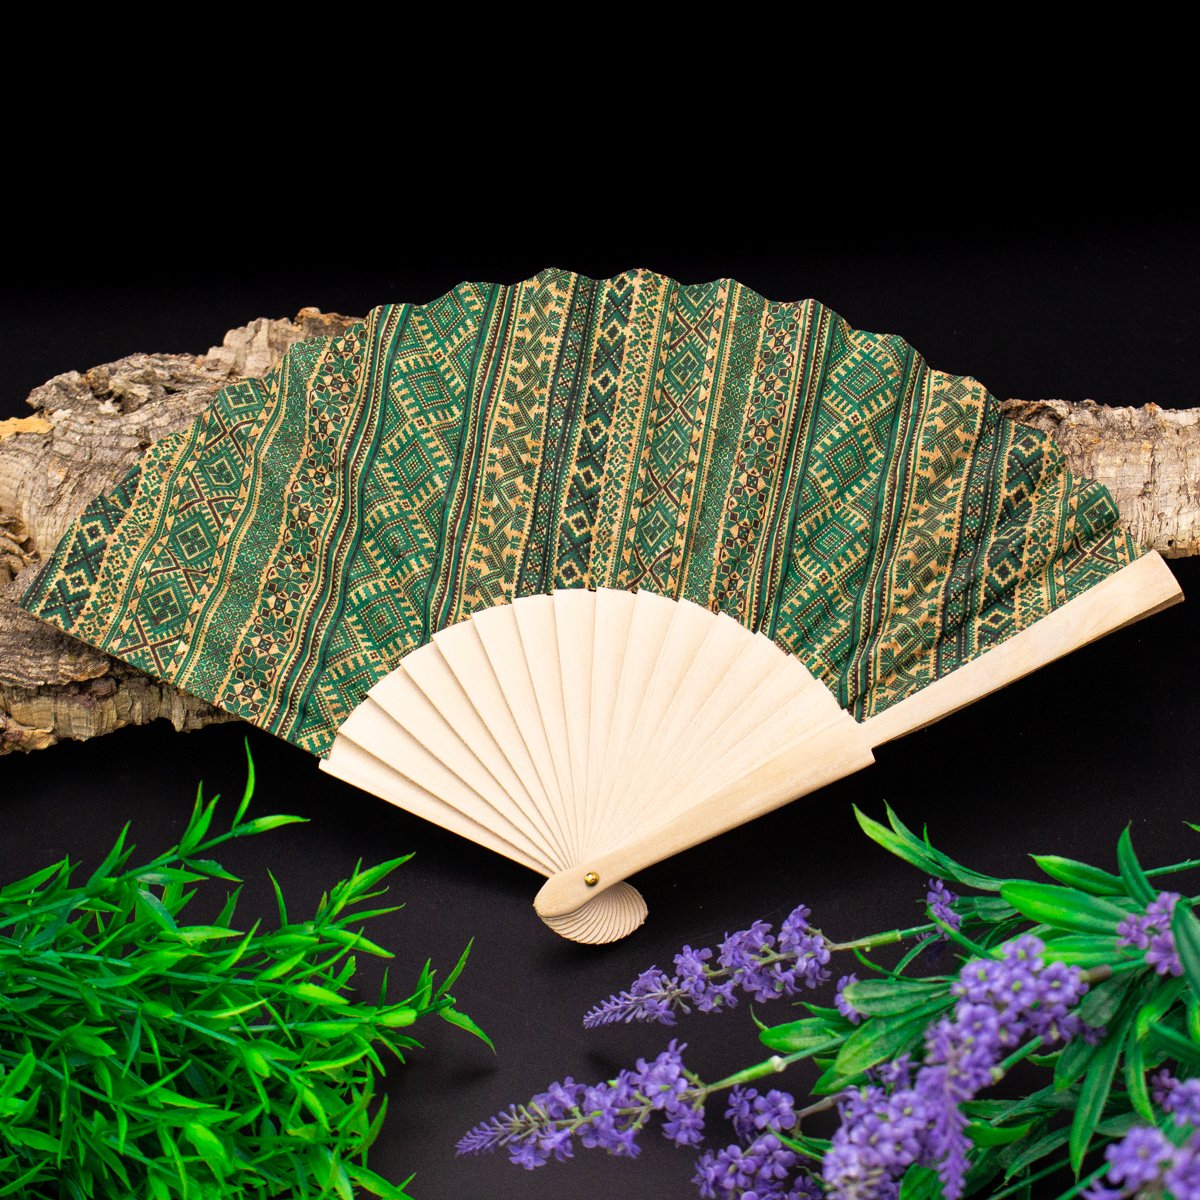 Cork Antique Wooden Folding Hand Fan | THE CORK COLLECTION